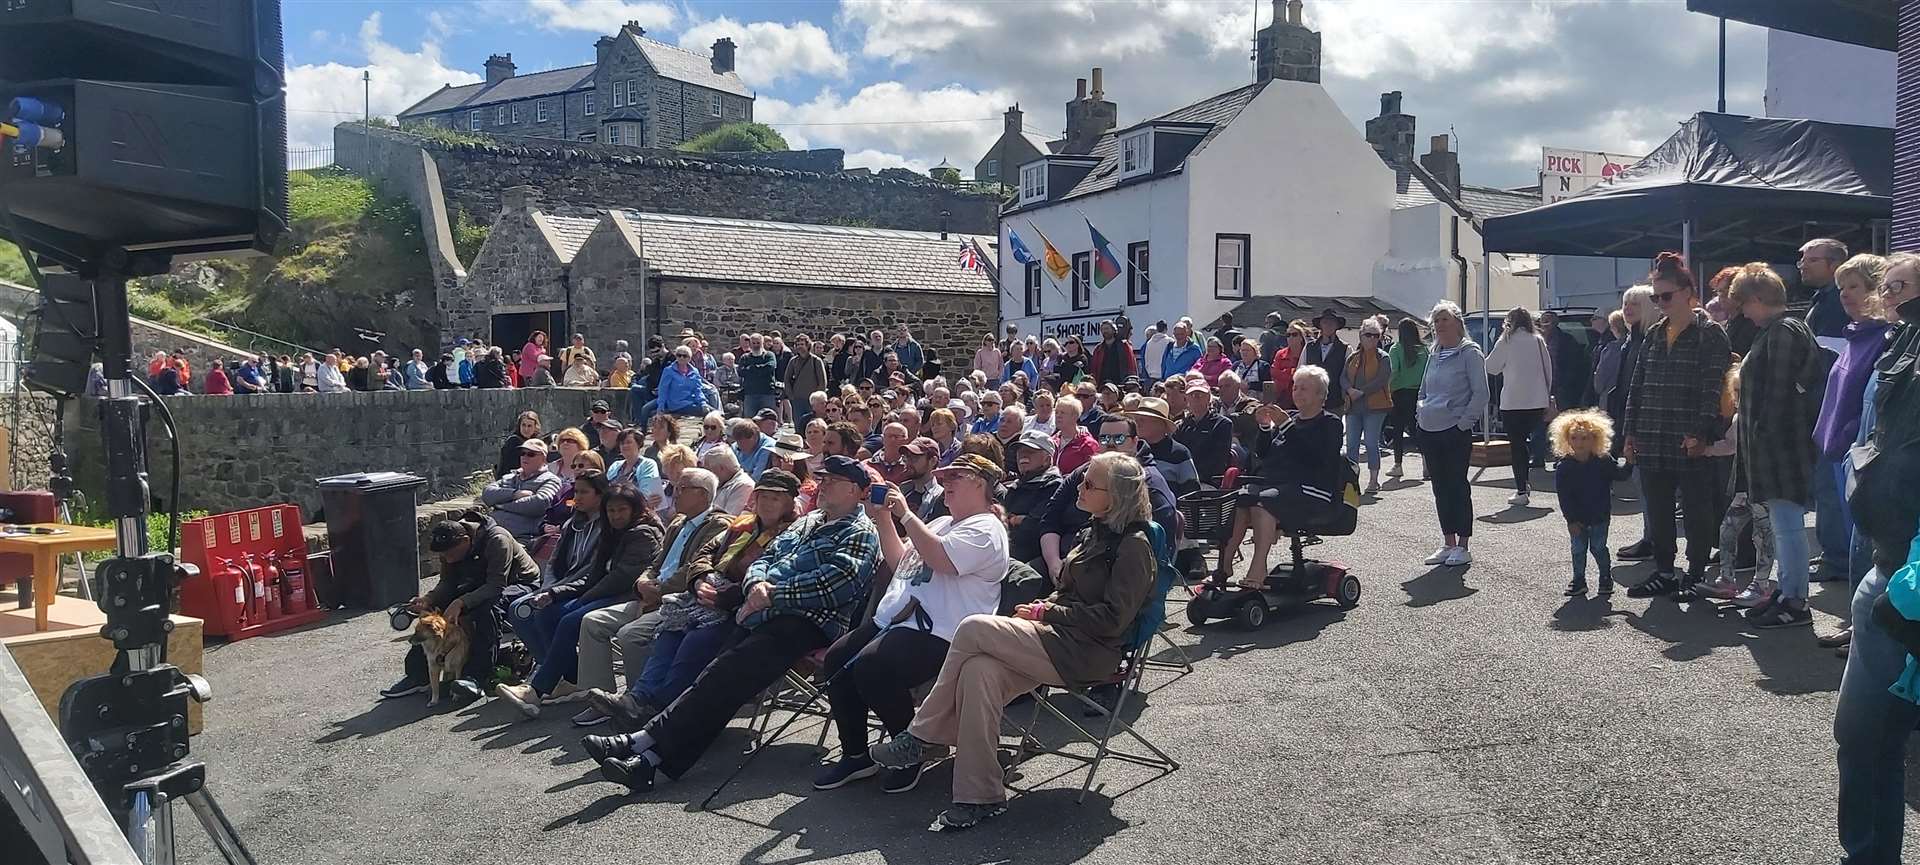 The crowds enjoyed the entertainment in the sunshine.